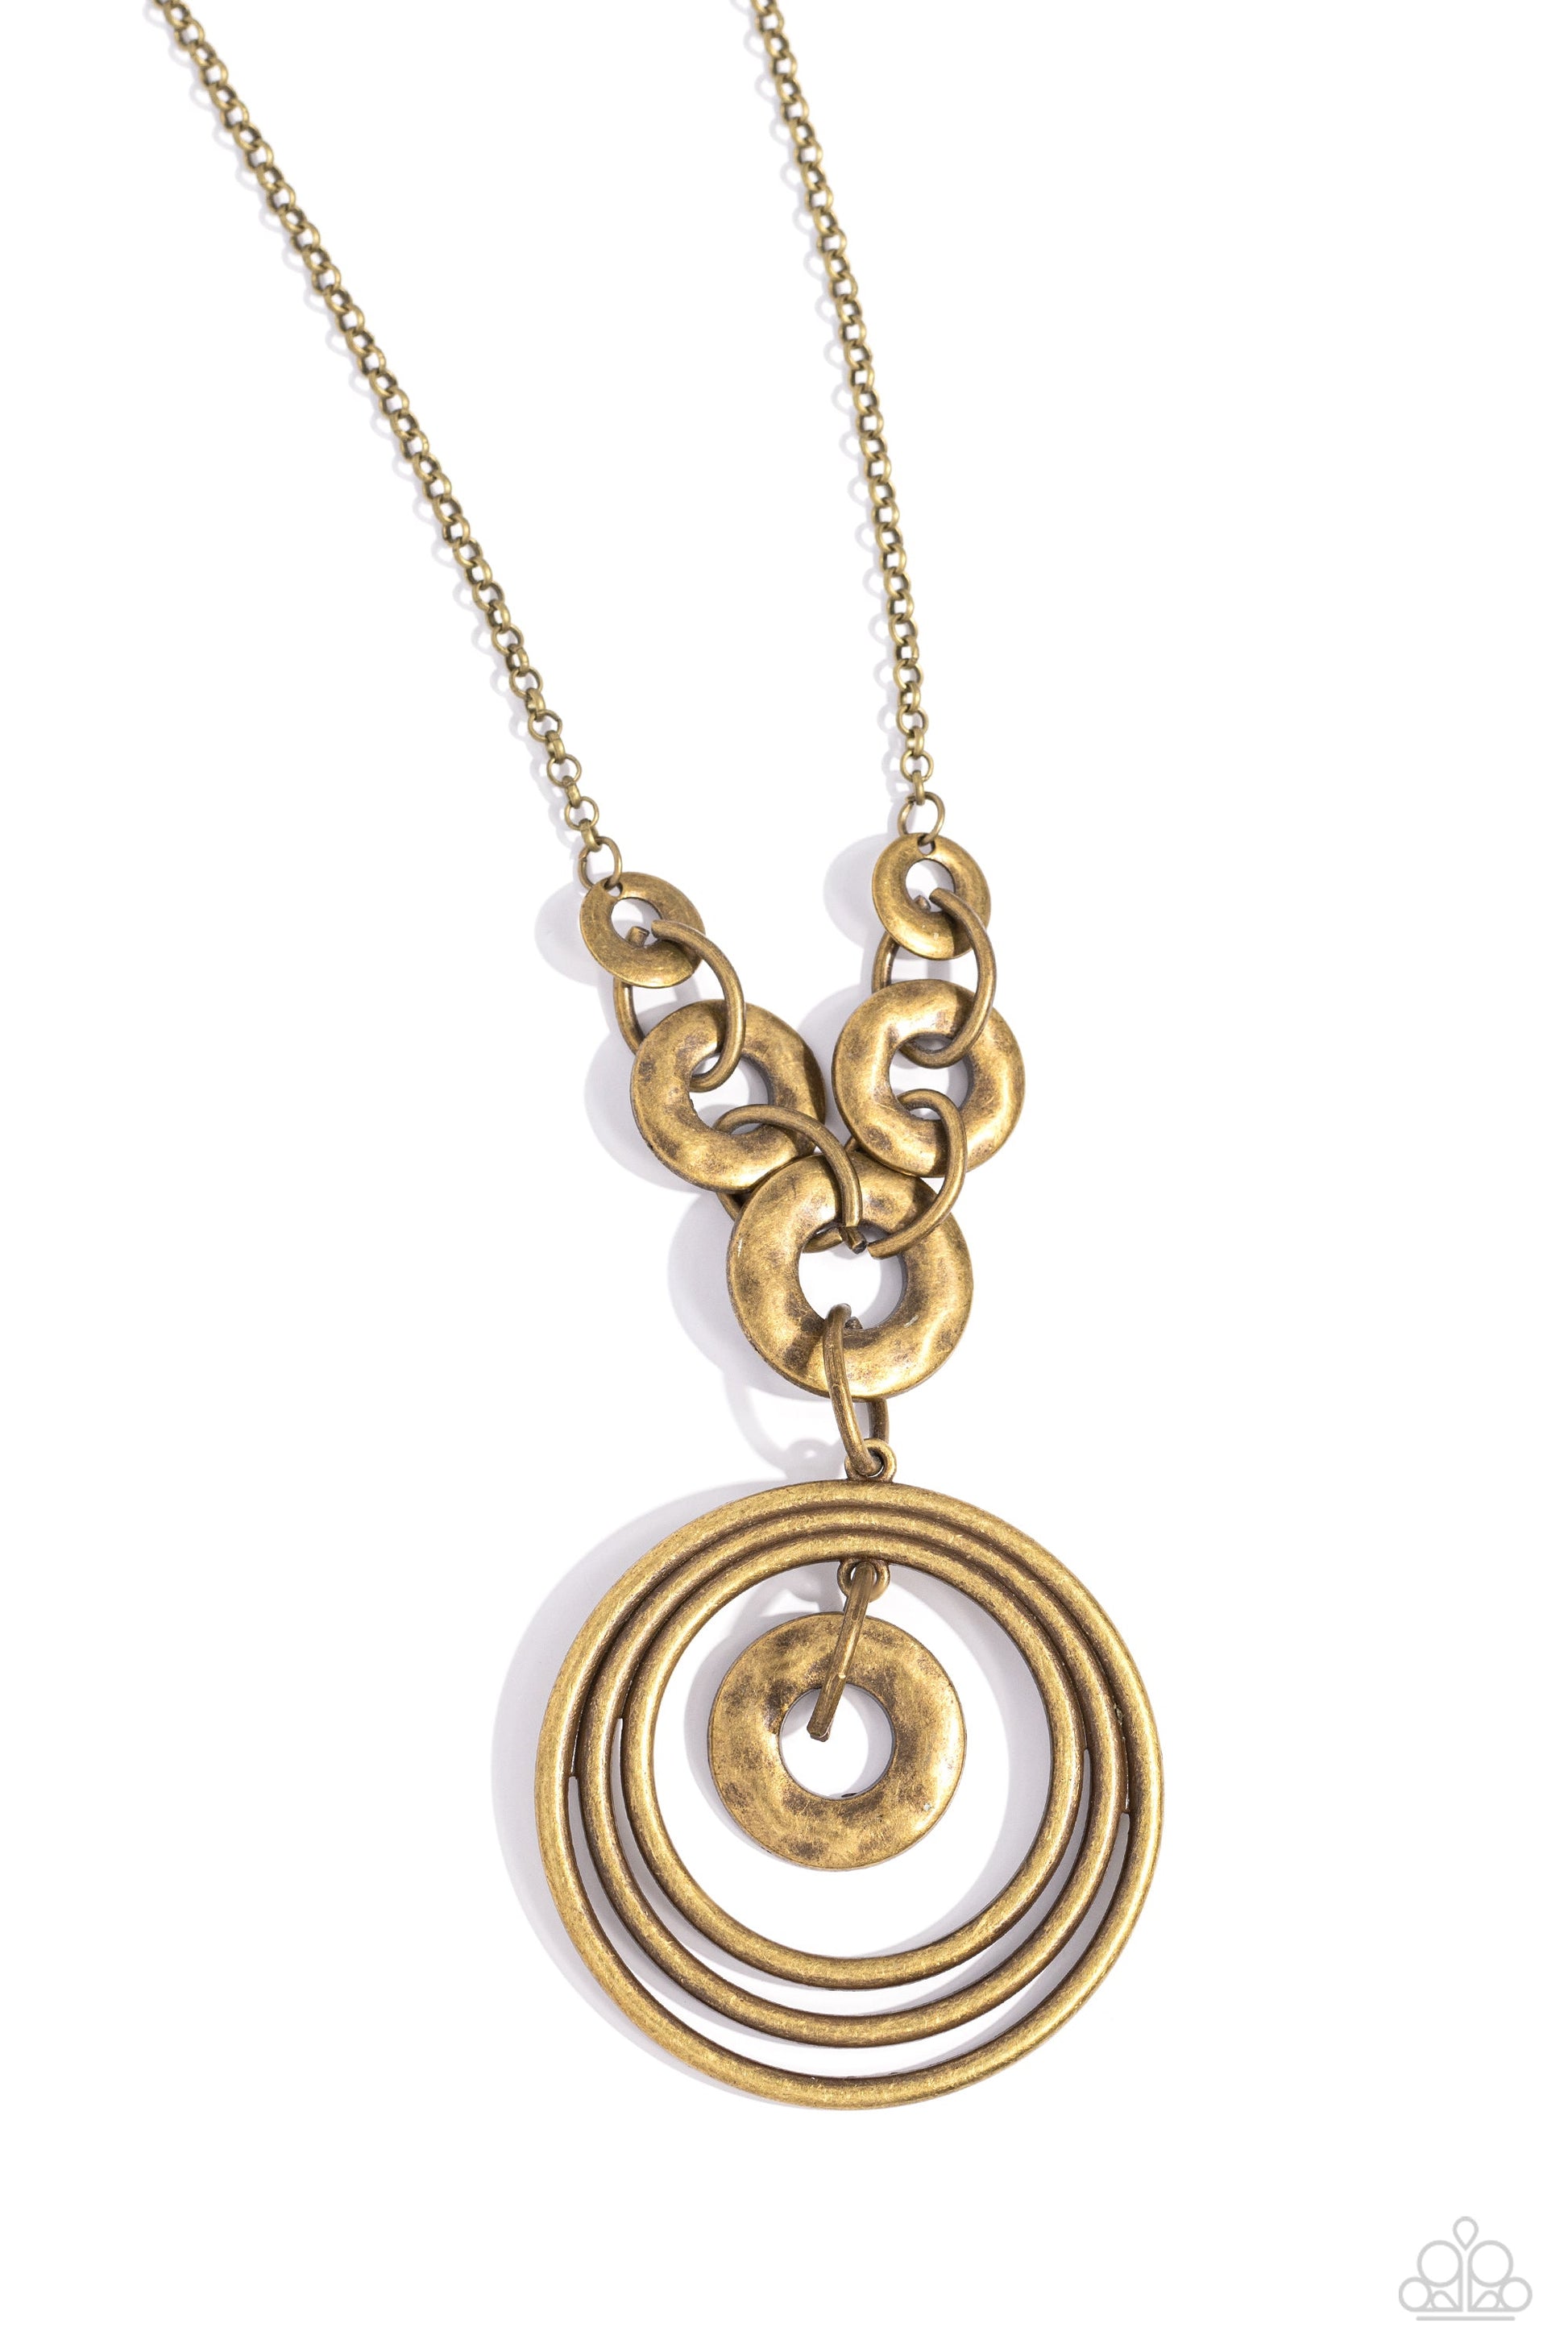 High HOOPS - Brass Fashion Necklace - Paparazzi Accessories - A trio of gritty brass rings swings from the bottom of a collection of hammered, brass hoops connected to an elongated chain in the same hue, creating an asymmetrically stacked pendant. A hammered brass ring swings in the center of the gritty rings, creating additional monochromaticity. Features an adjustable clasp closure.